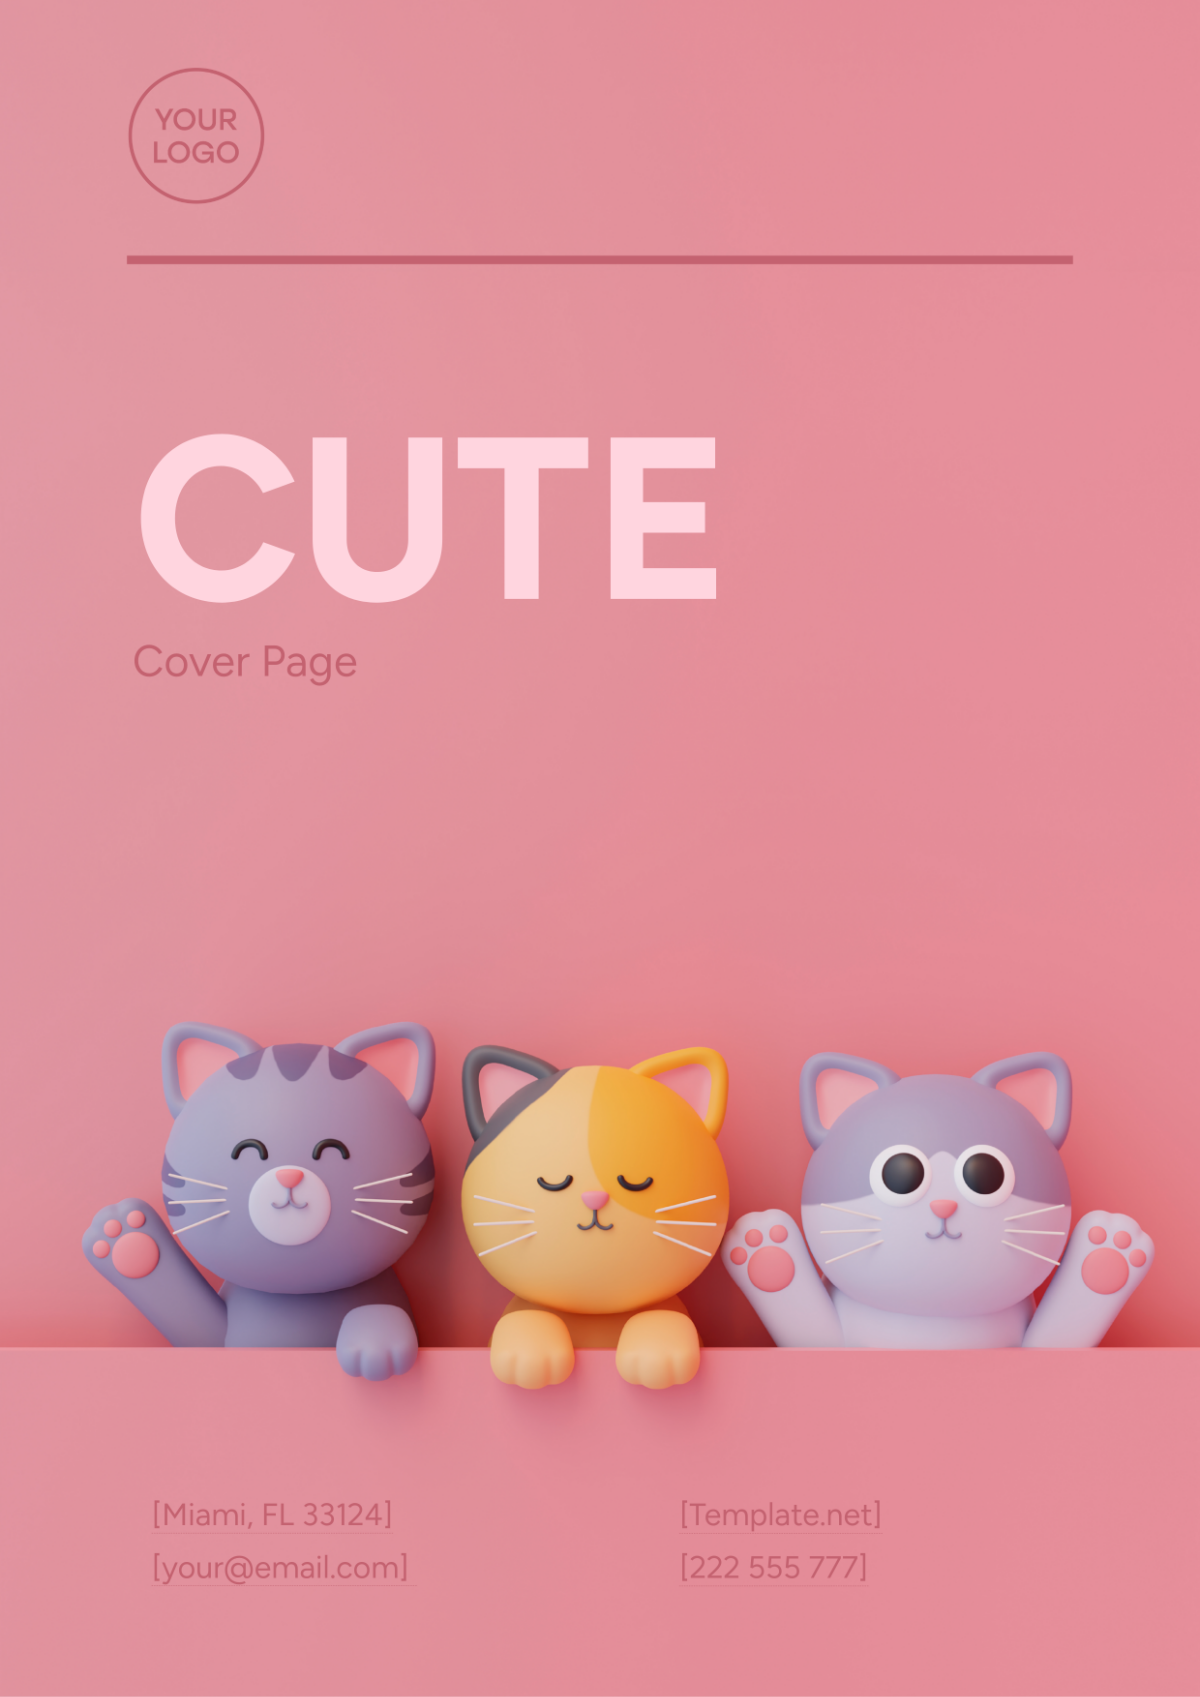 Cute Cover Page Image